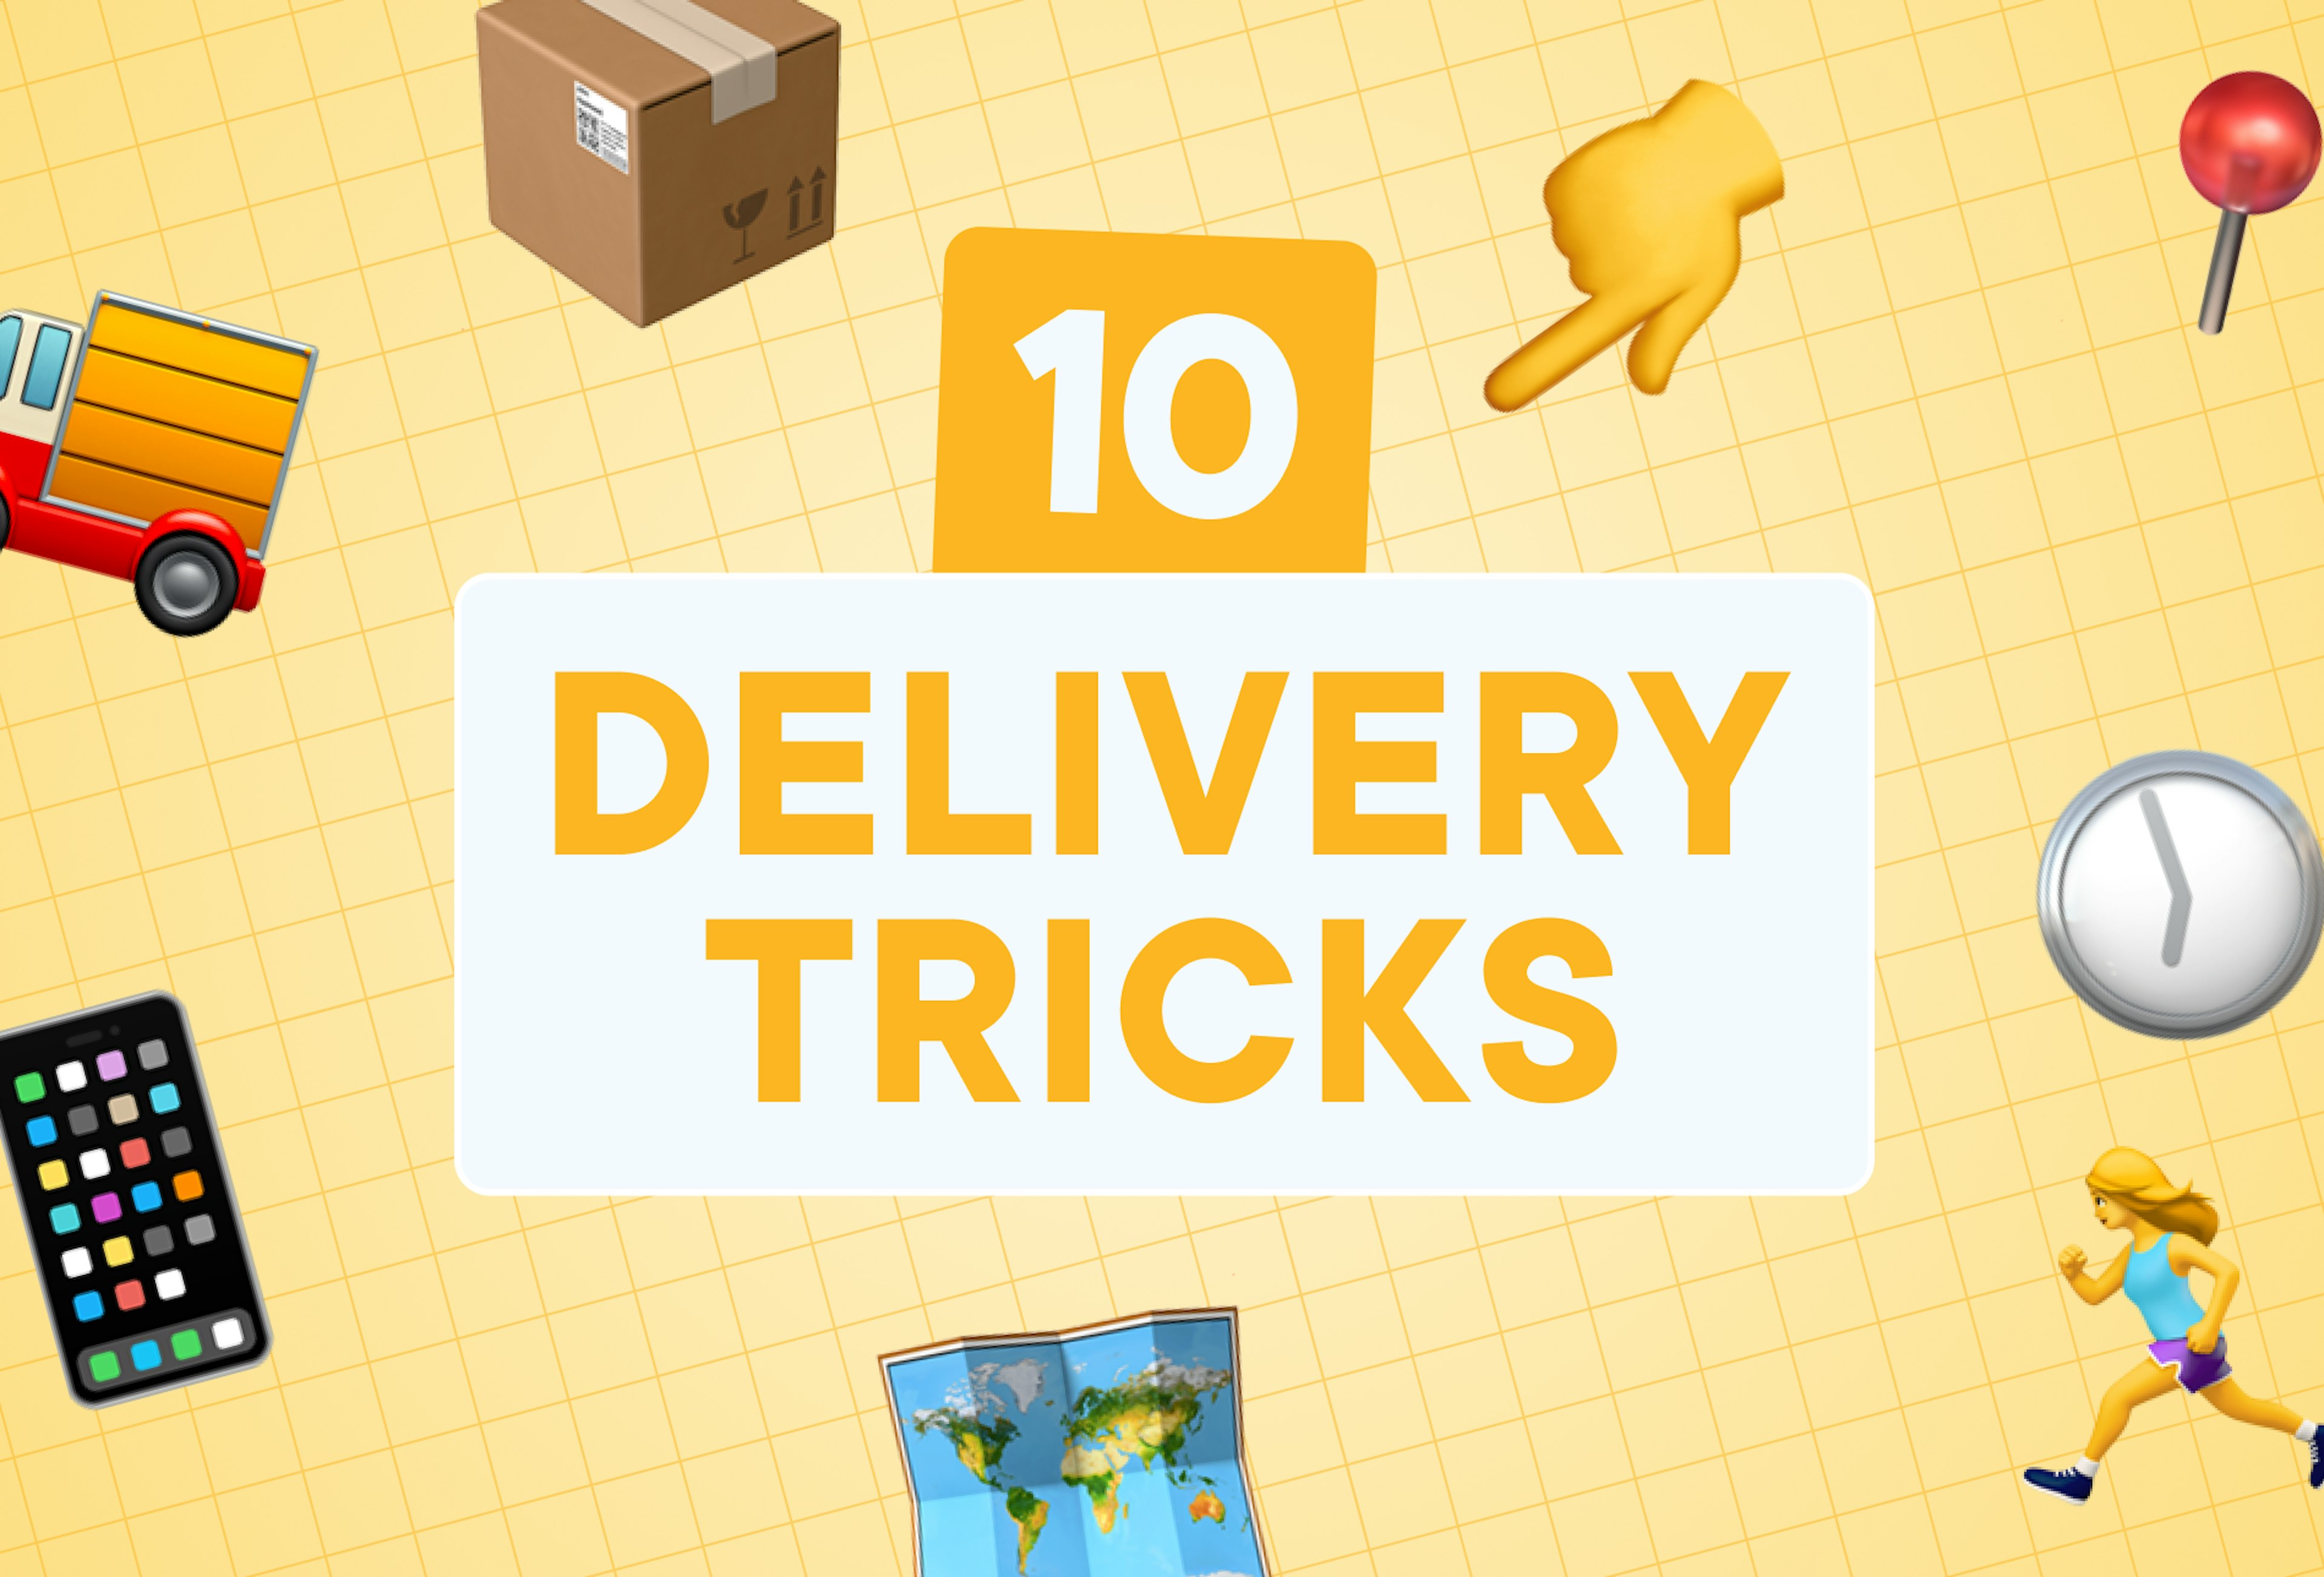 10 delivery tricks: Cartoon emojis of a box, a hand, a lollipop, a truck, a smart phone, a map, and a runner